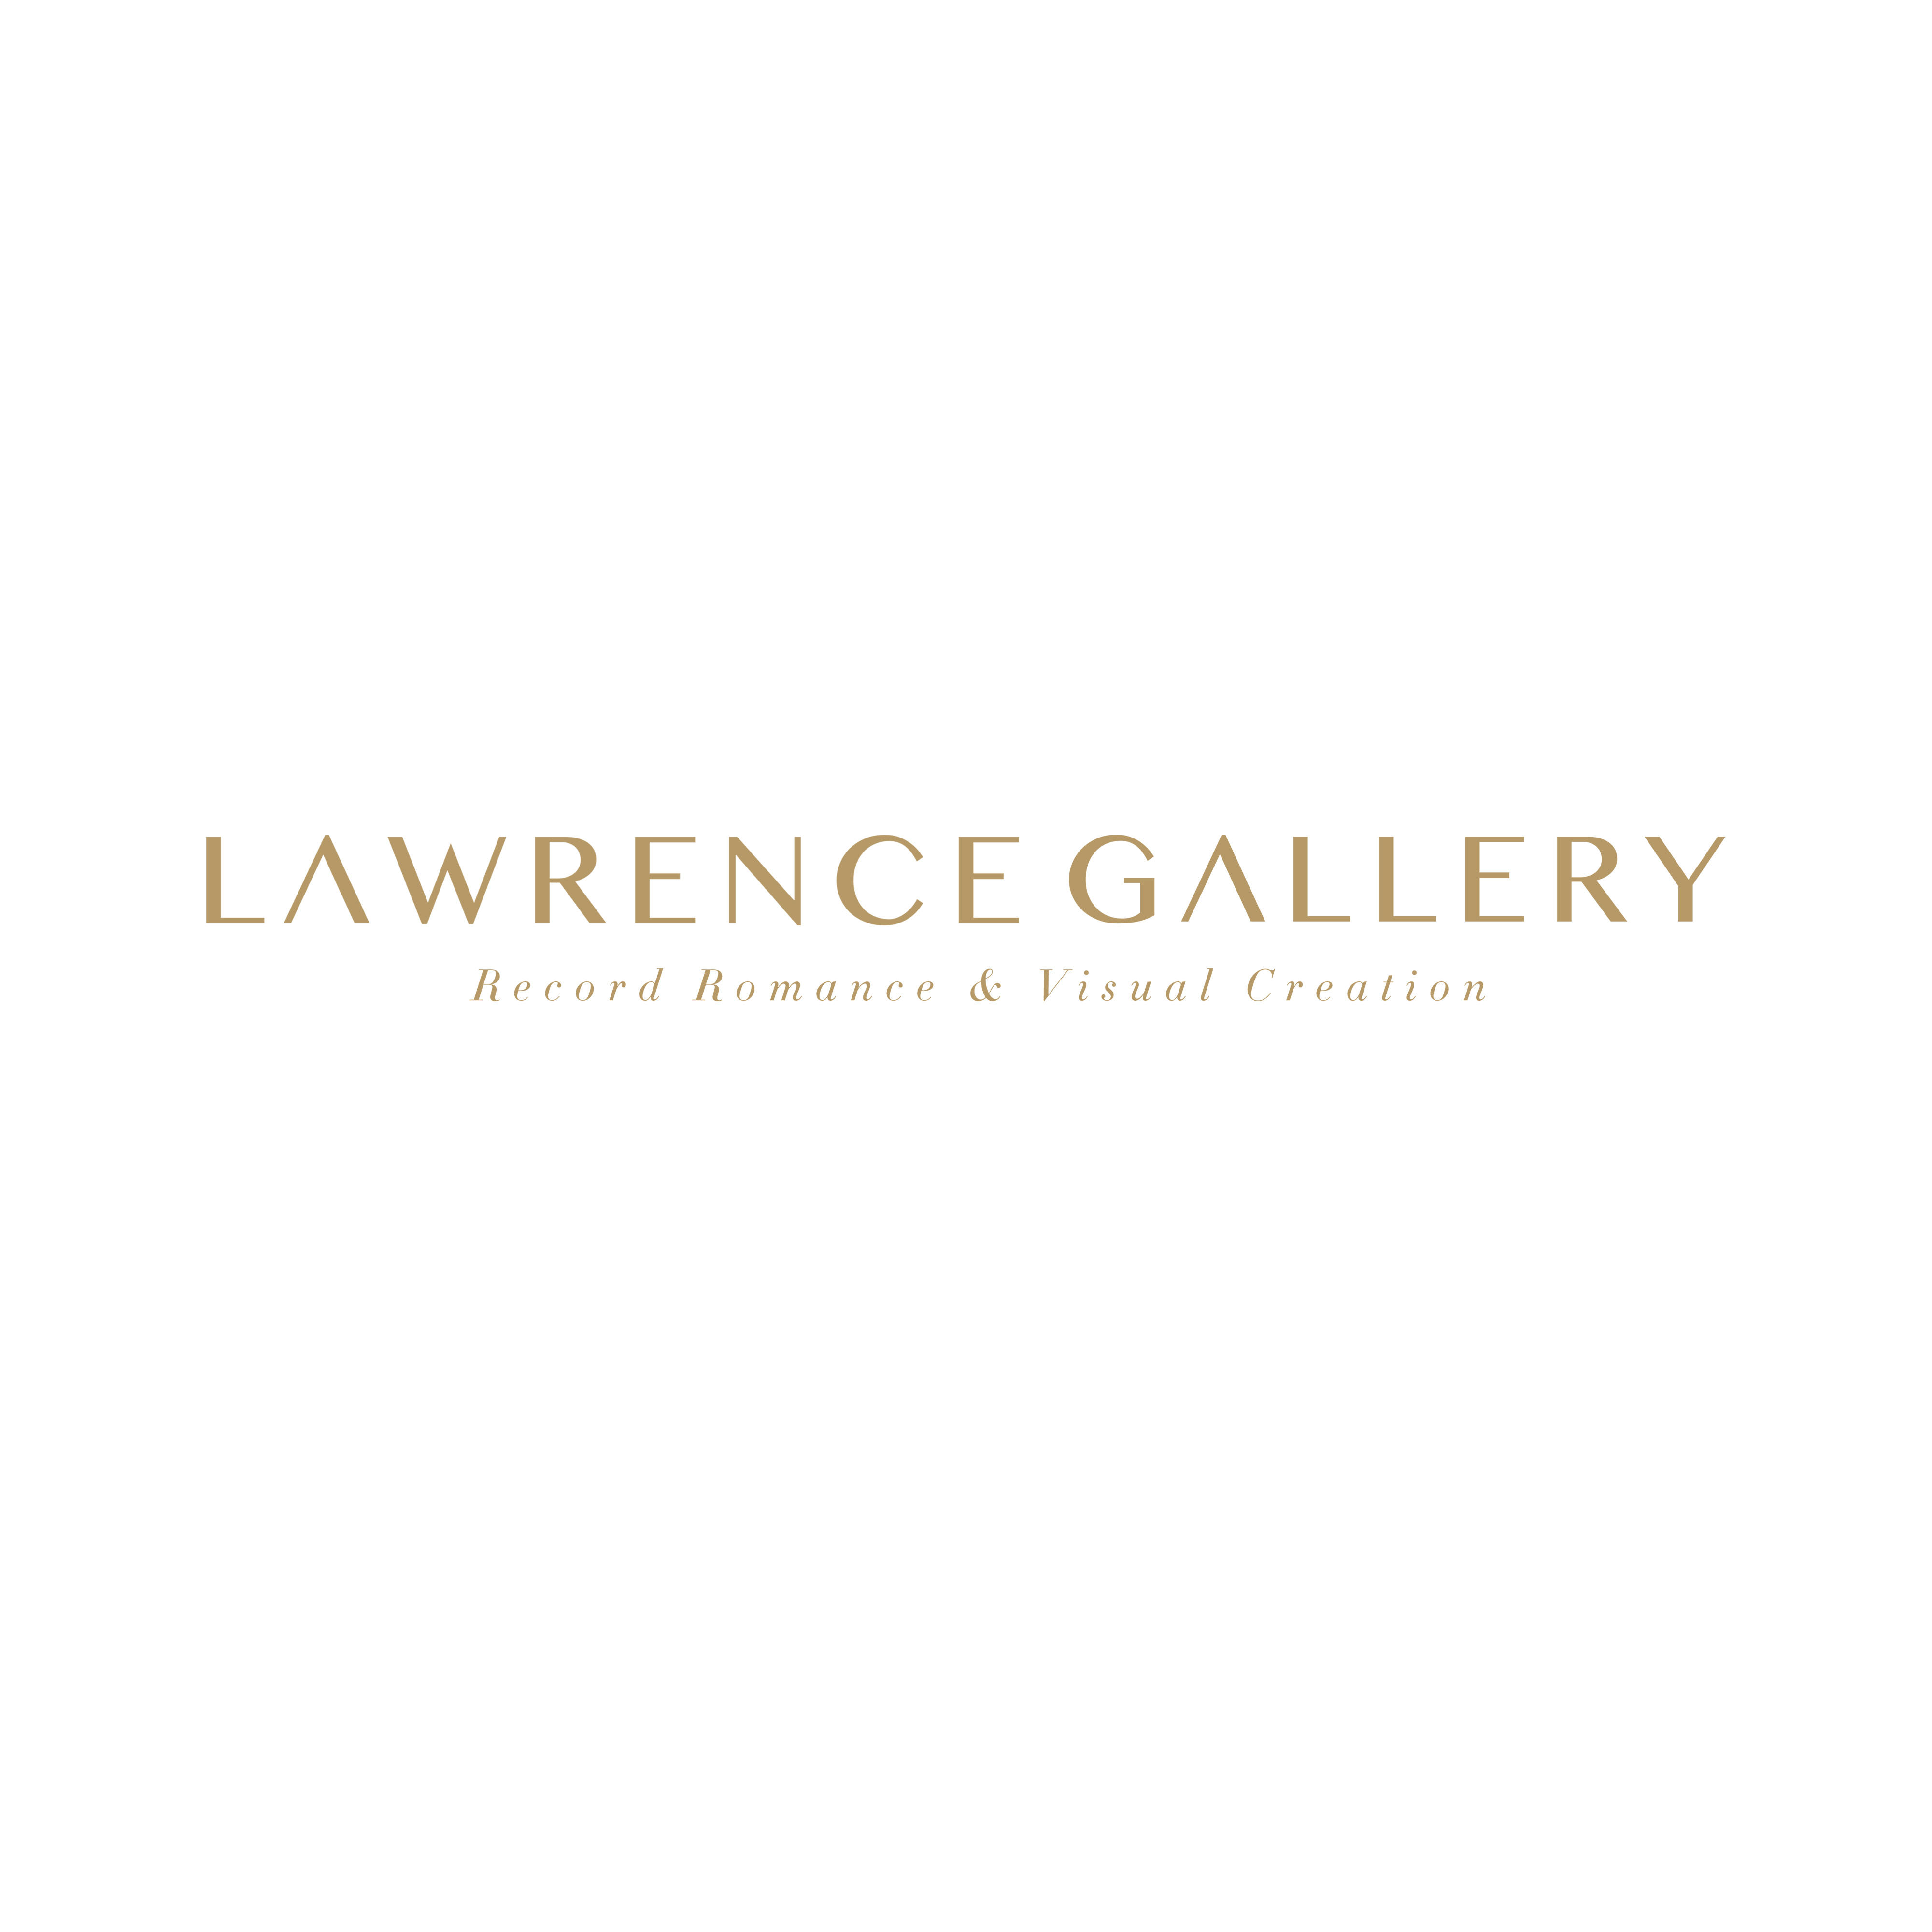 LAWRENCE GALLERY